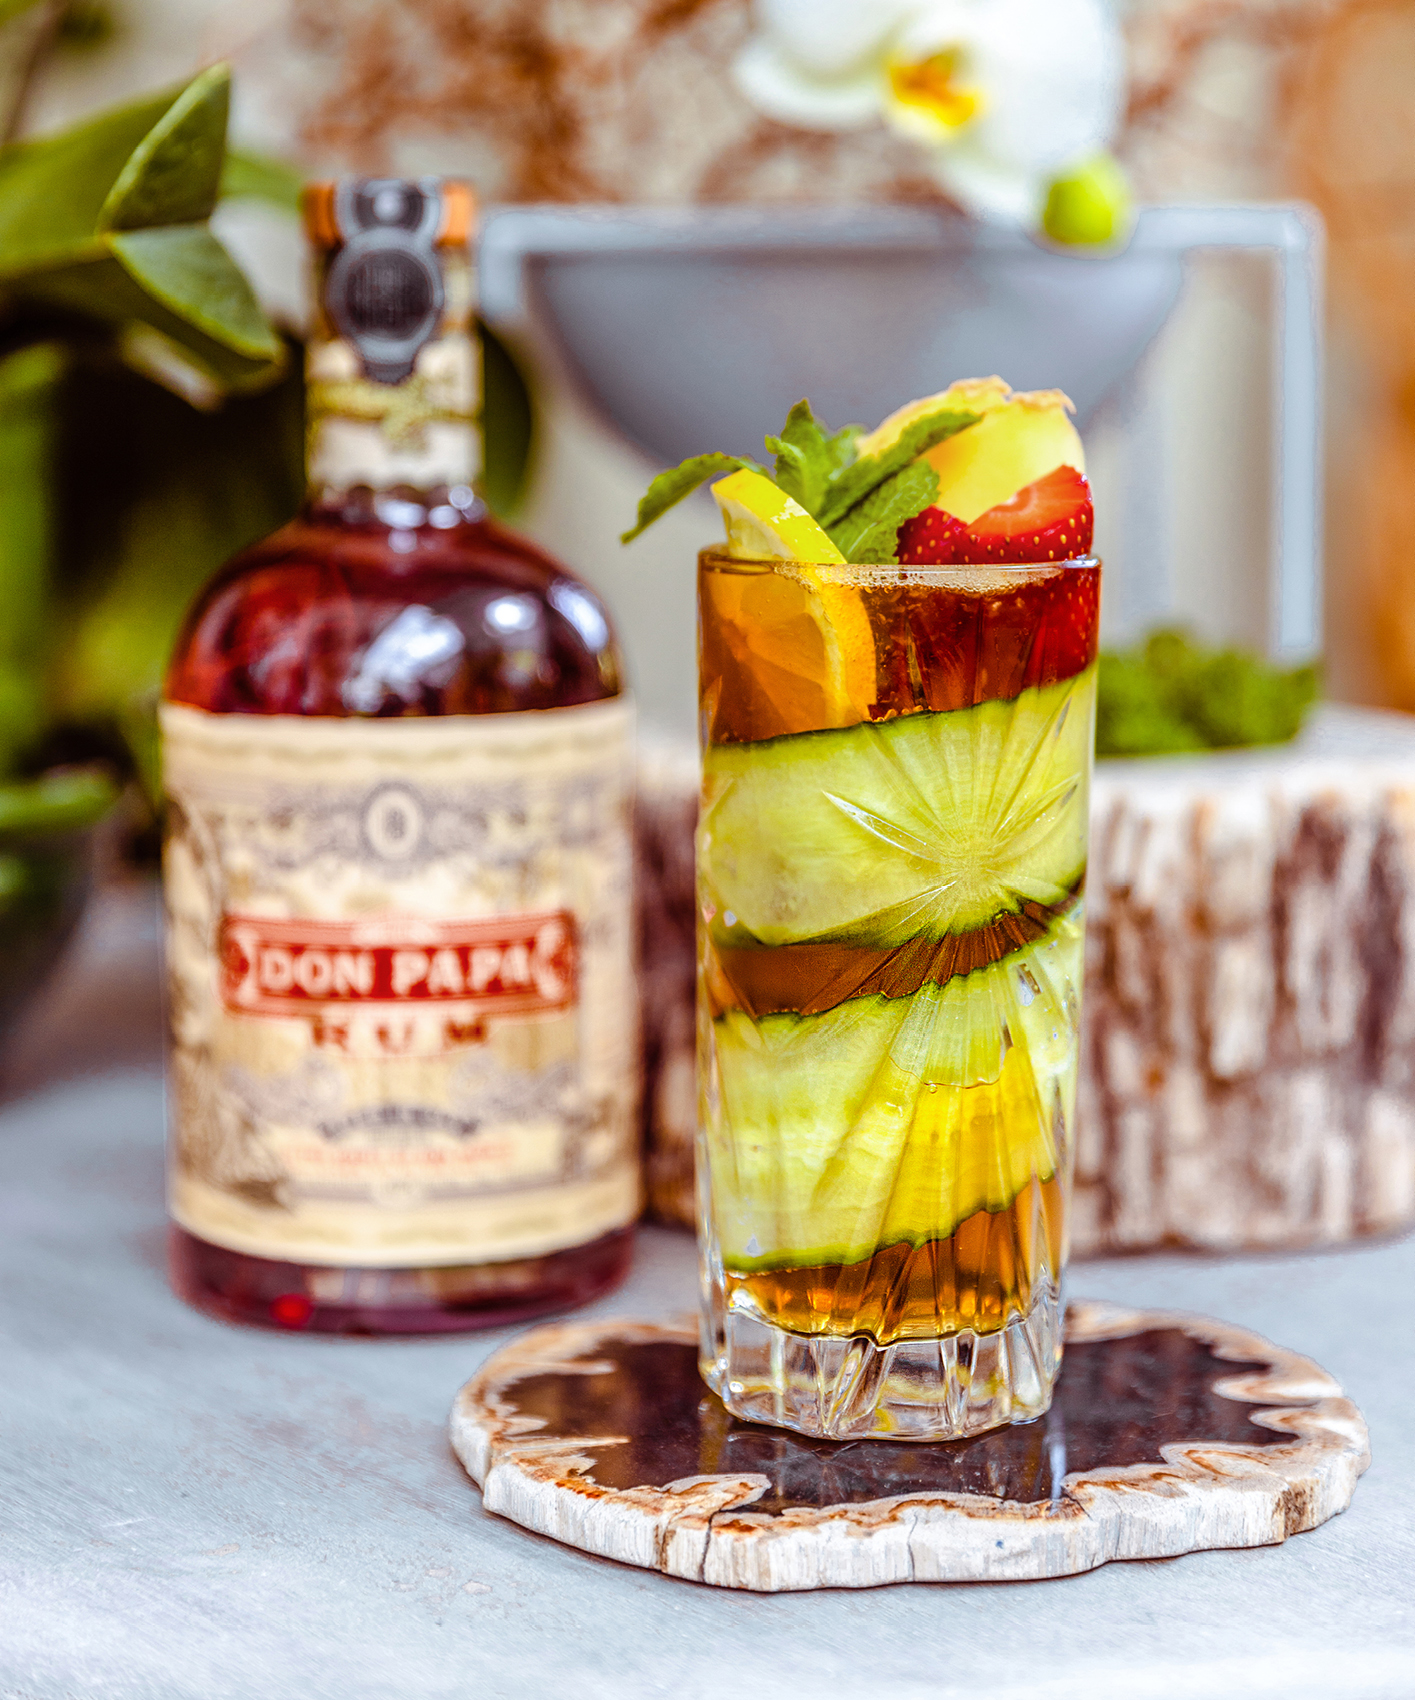 A Papa Pimm's Cup